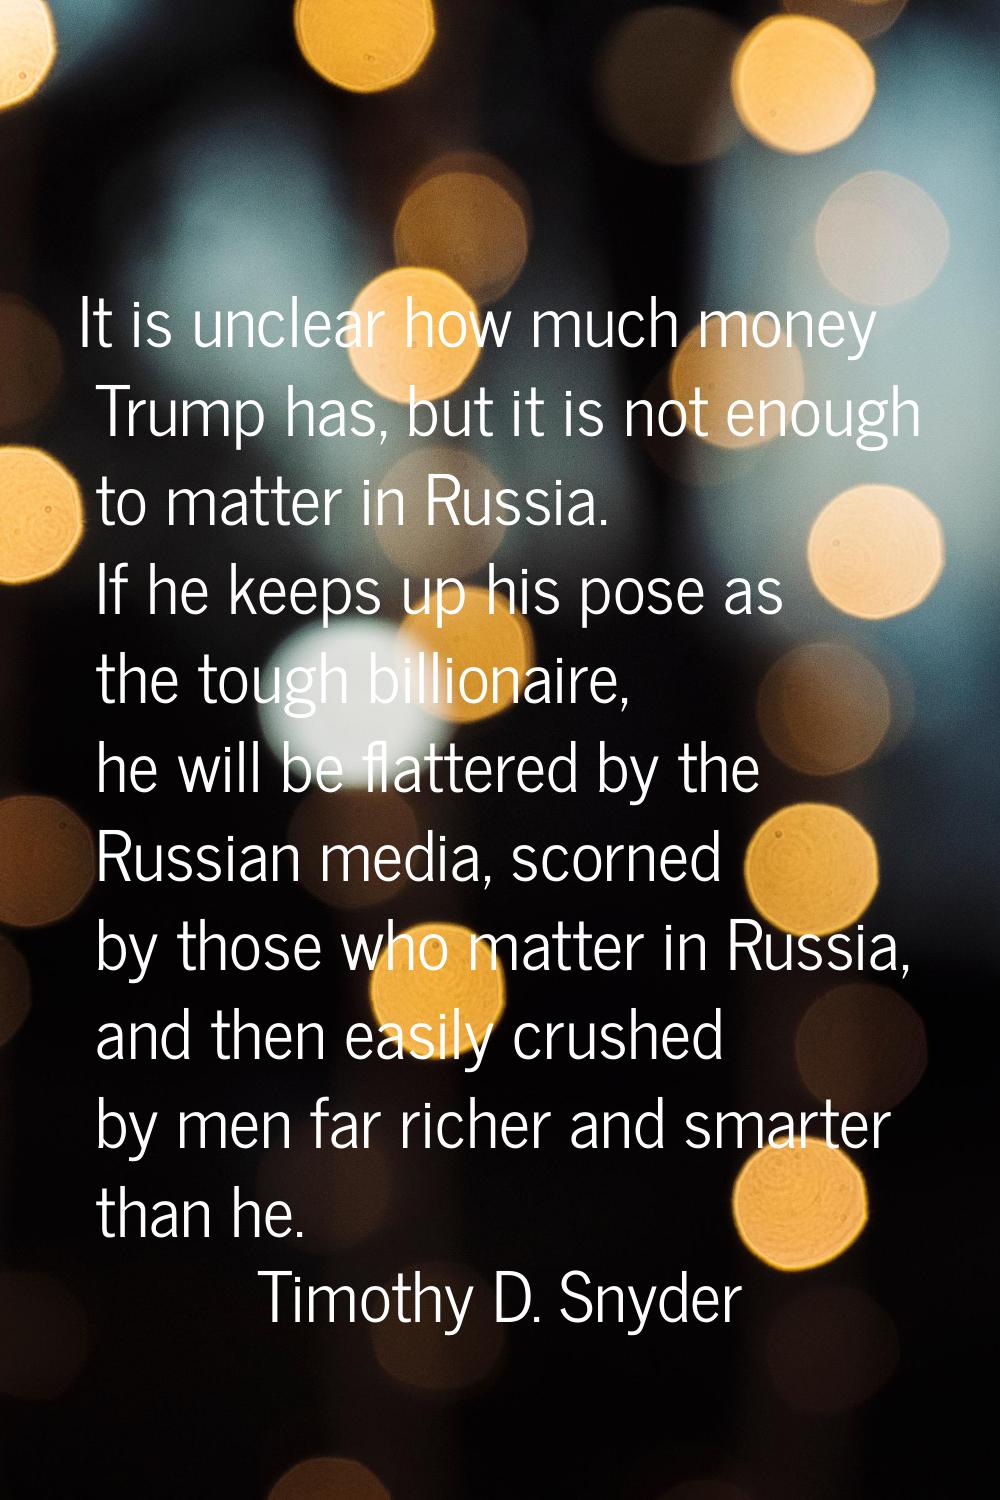 It is unclear how much money Trump has, but it is not enough to matter in Russia. If he keeps up hi